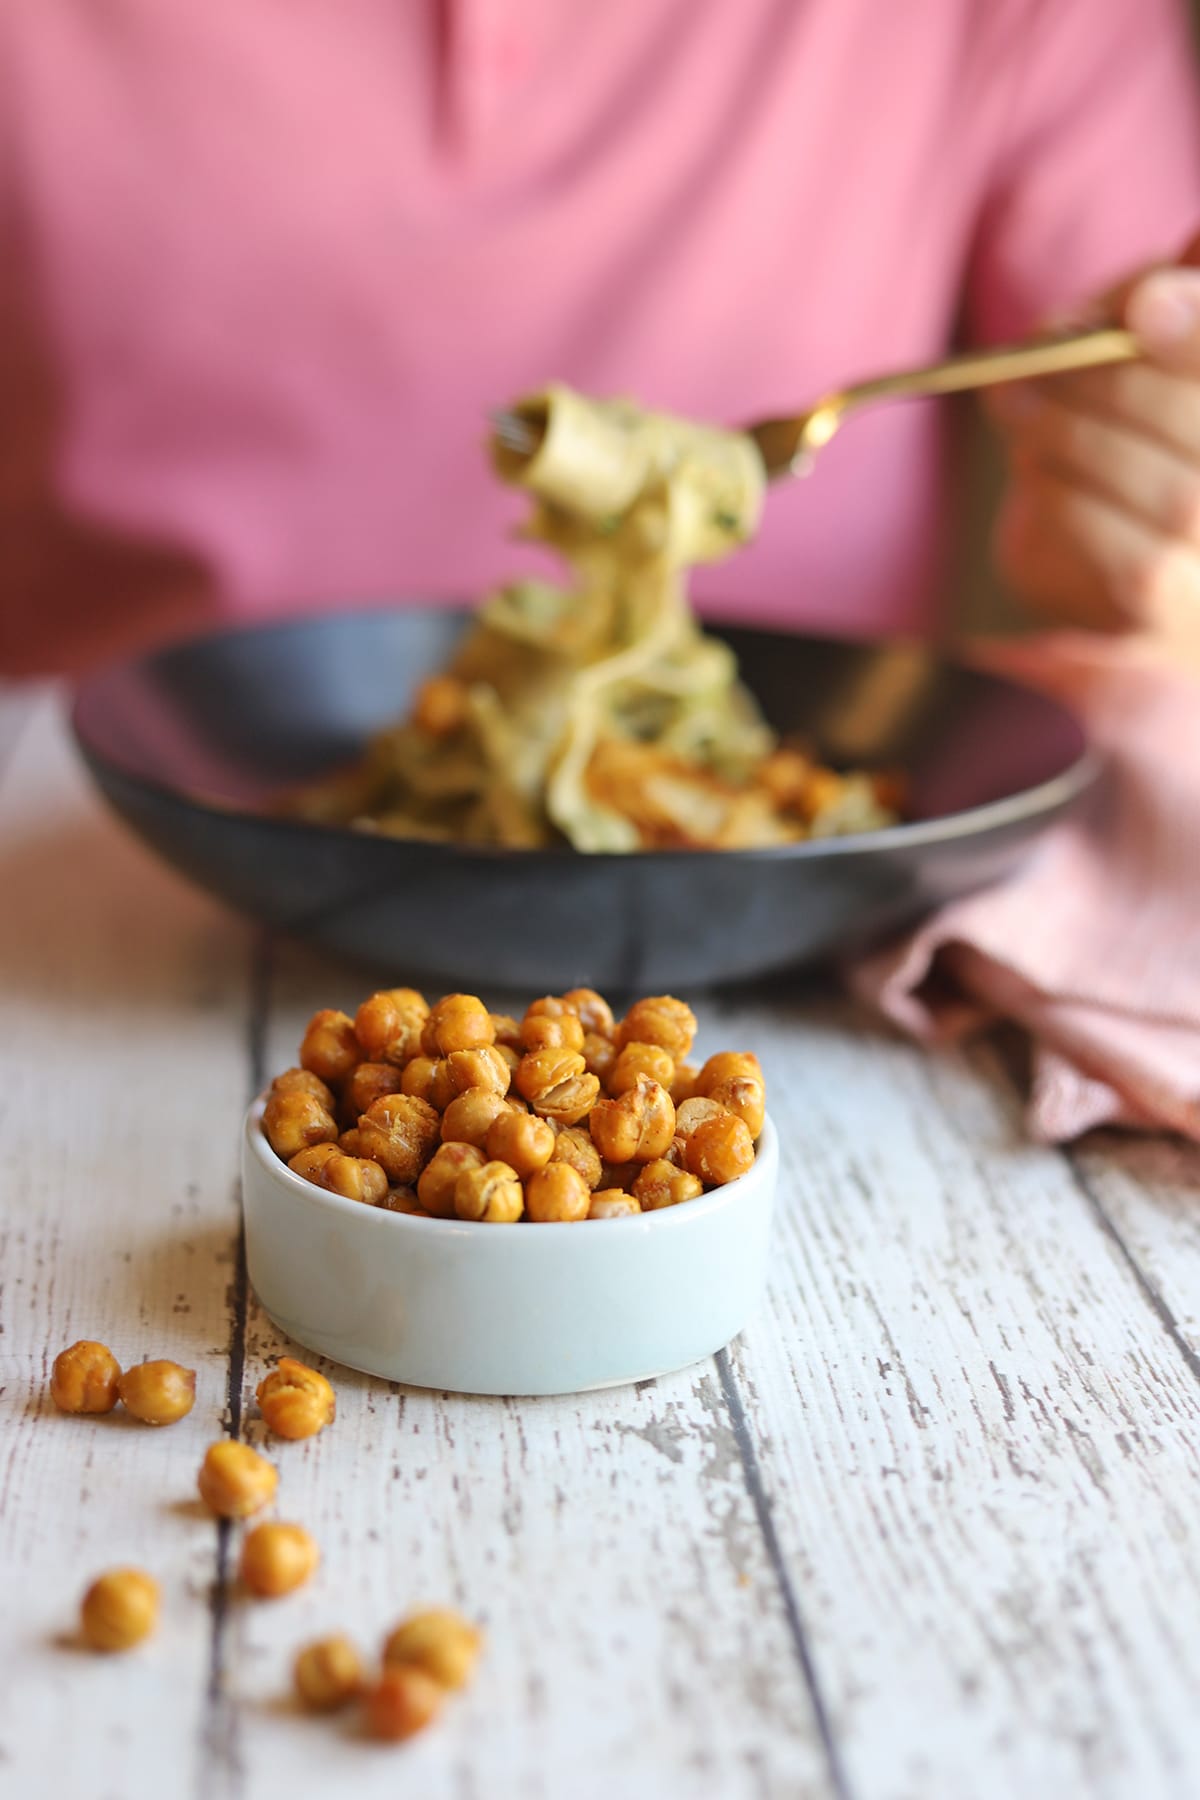 Fried chickpeas on table with bowl of pasta in background.